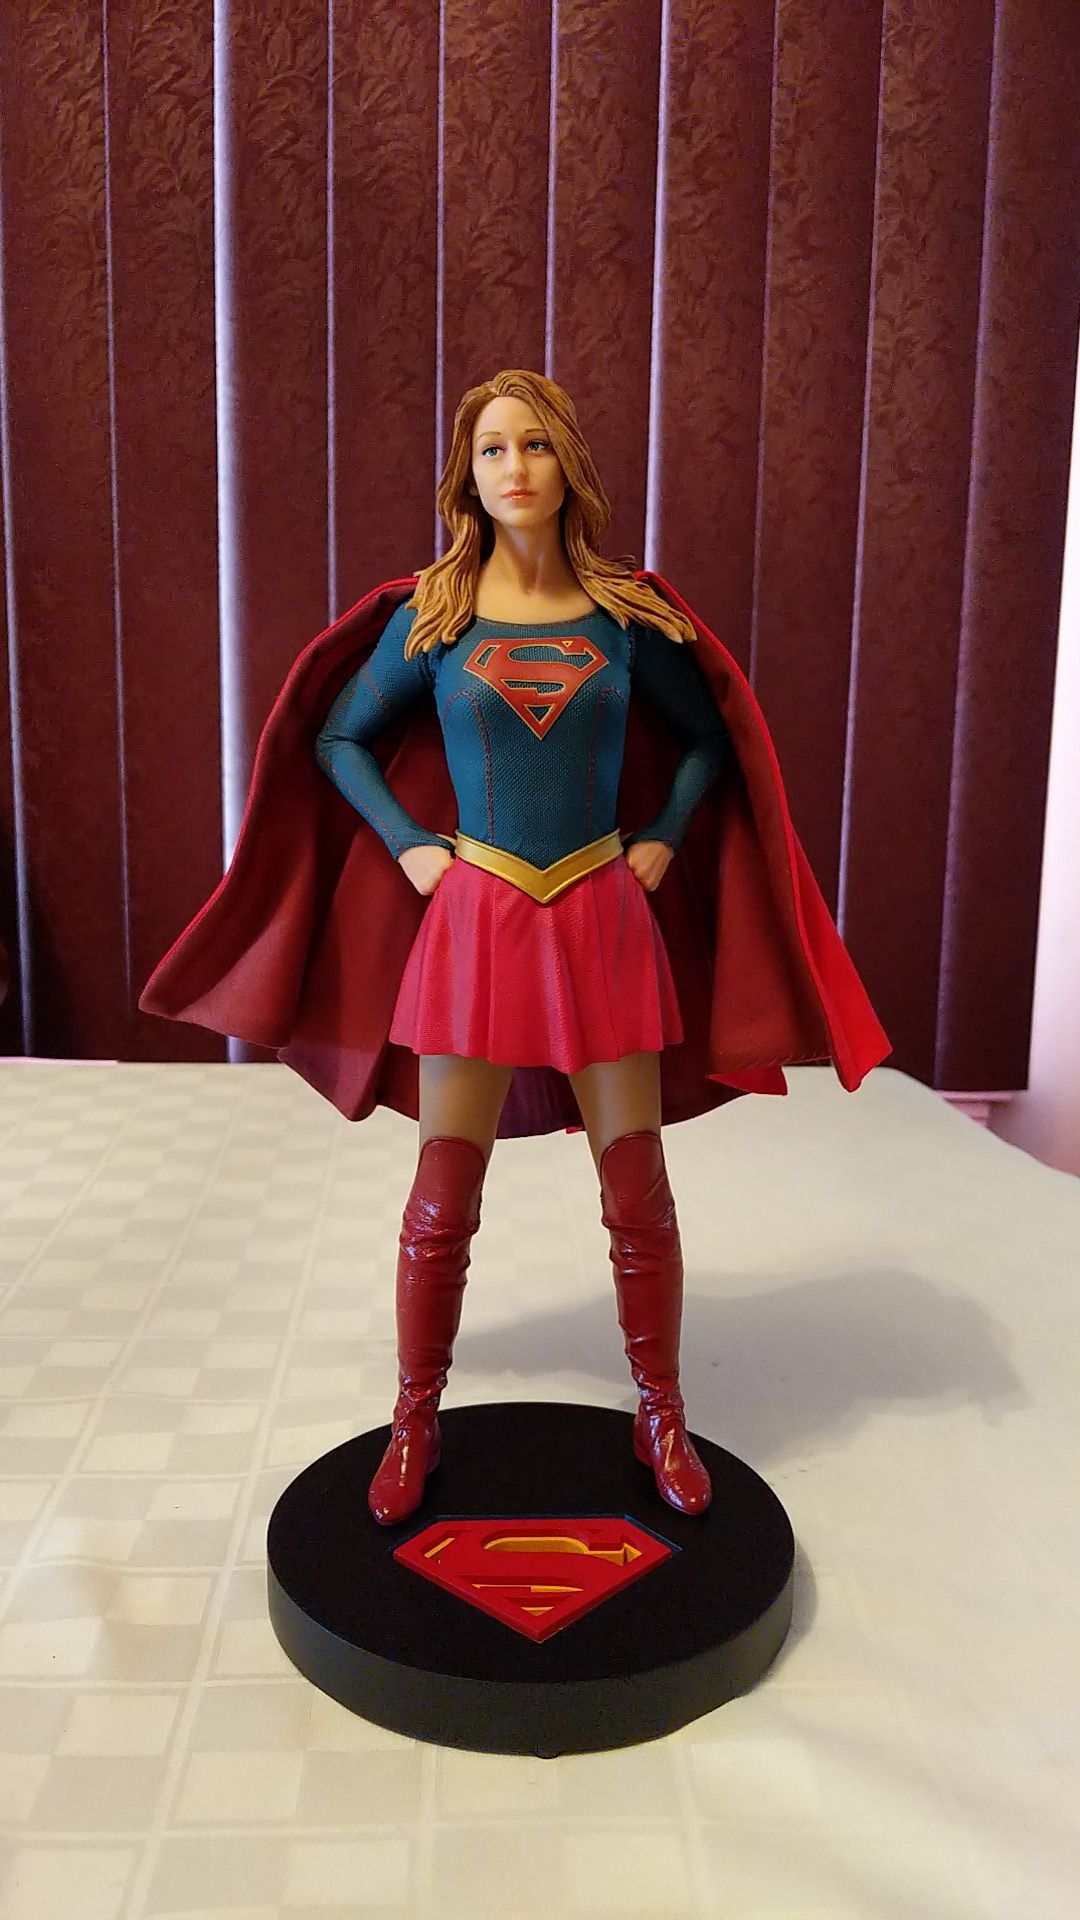 Supergirl Statue 12.5" (DC collectible)